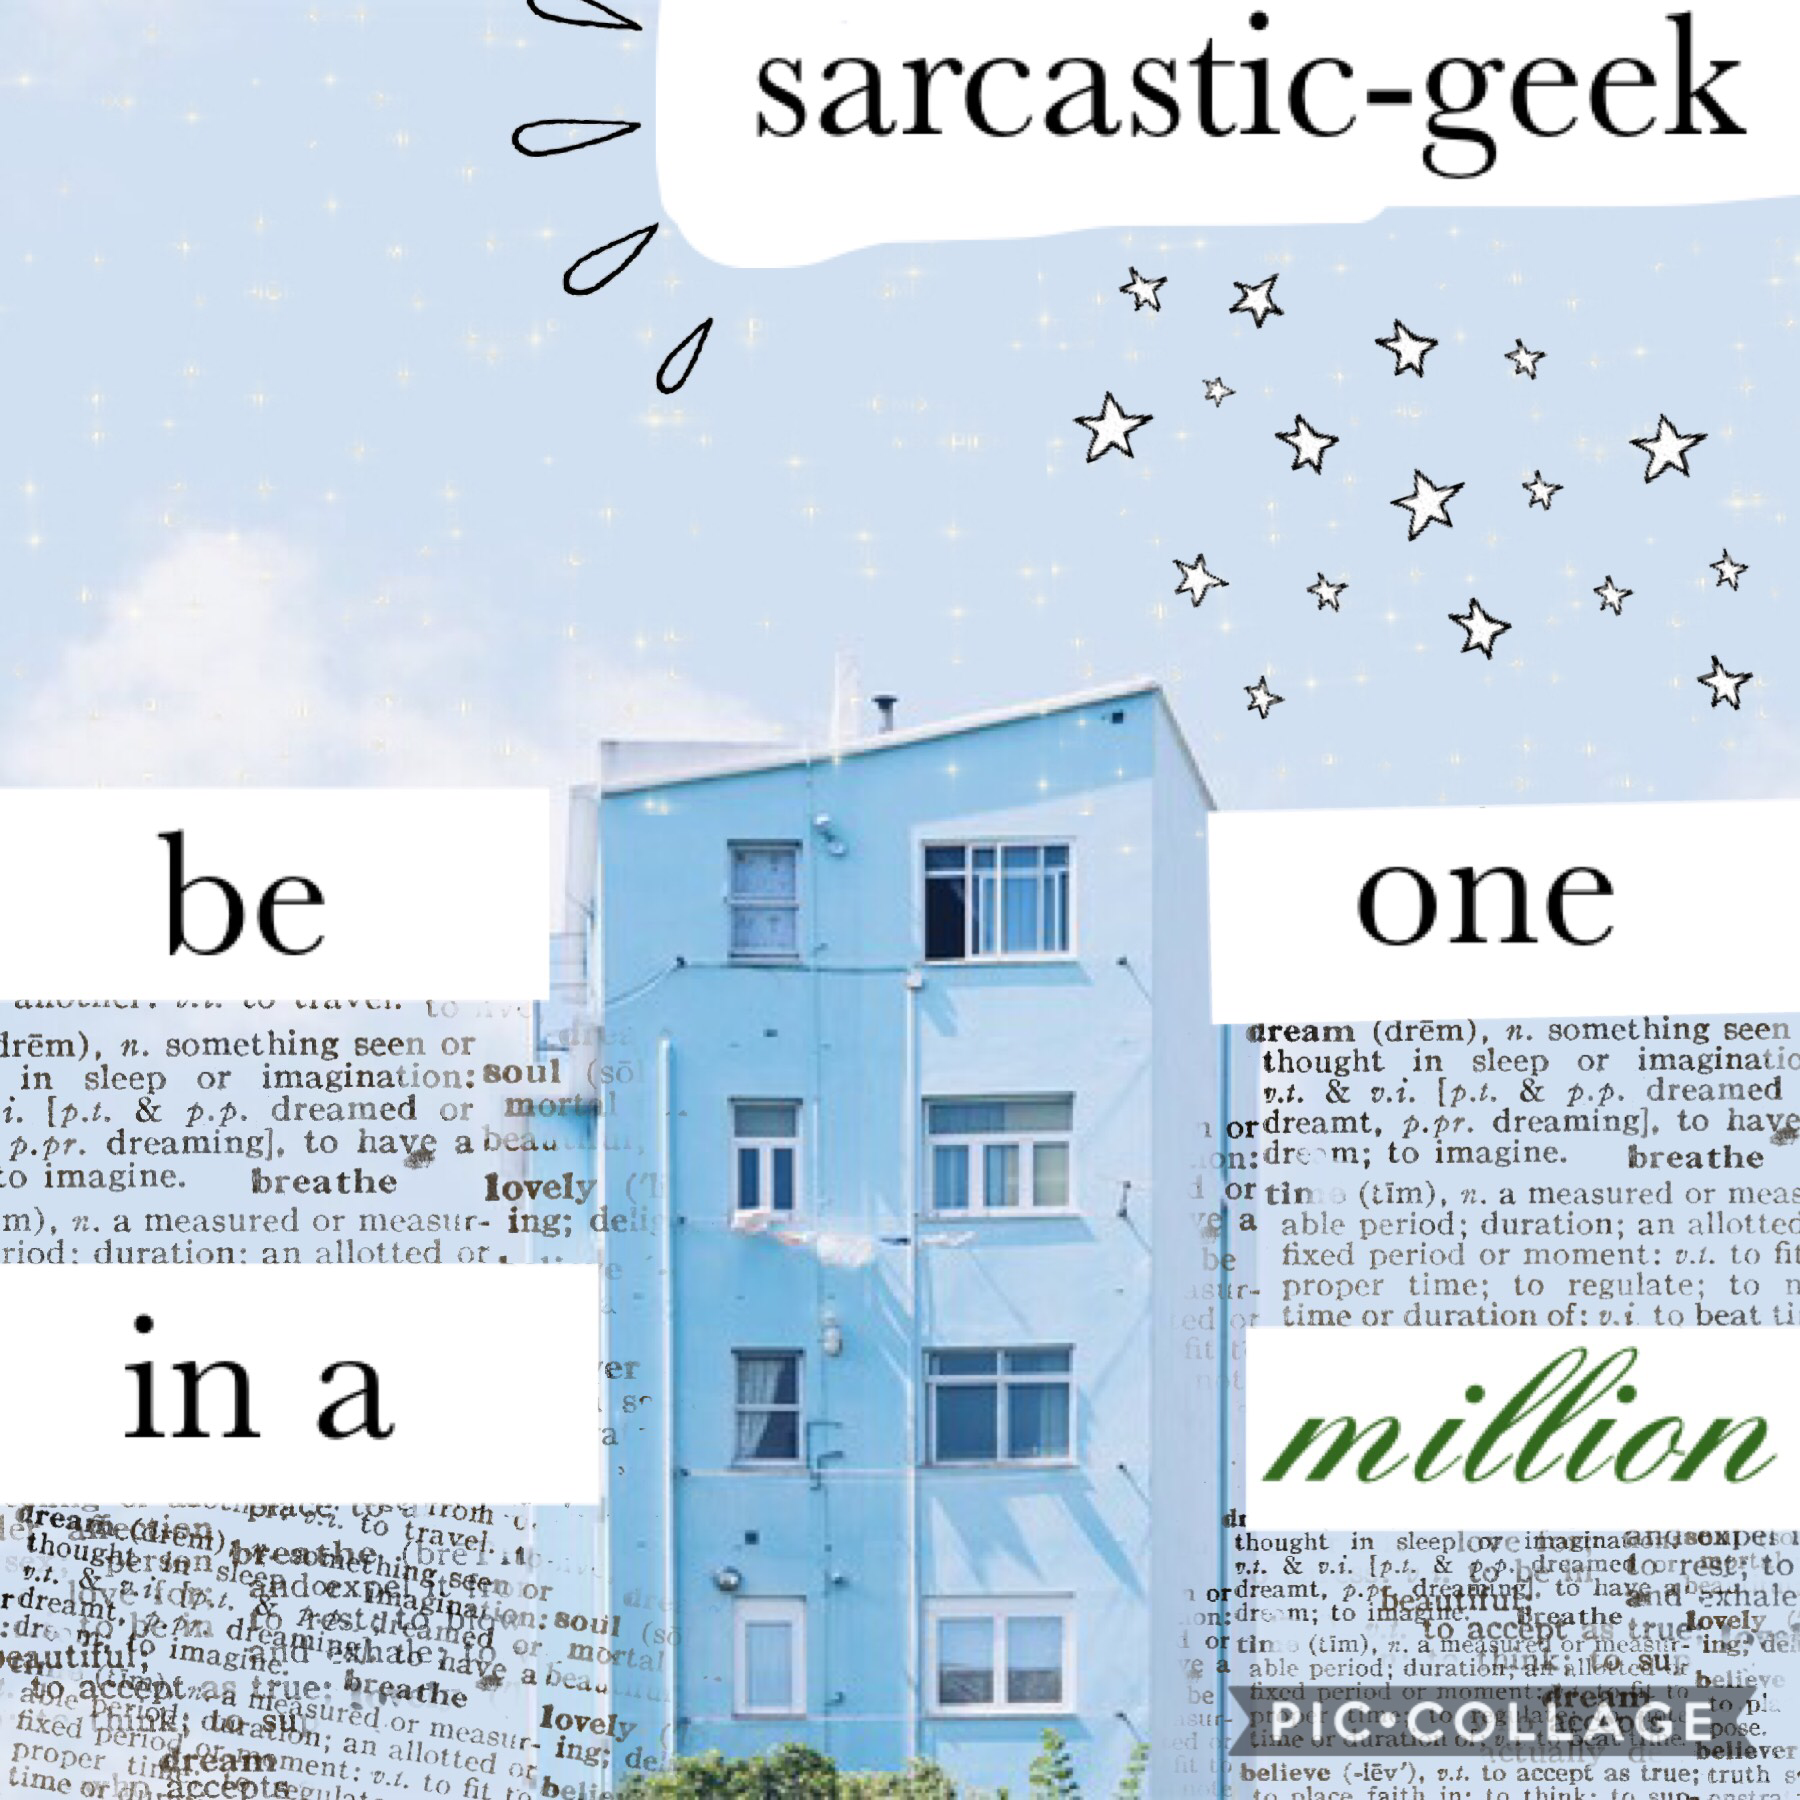 🤪Tap the silly emoji!🤪 



So... my name is sarcastic-geek because I’m a geek 🤓 and a little sarcastic. (under statement) I’m super sarcastic. Whatcha think about this collage?! I’m excited to see the comments!!! 😊